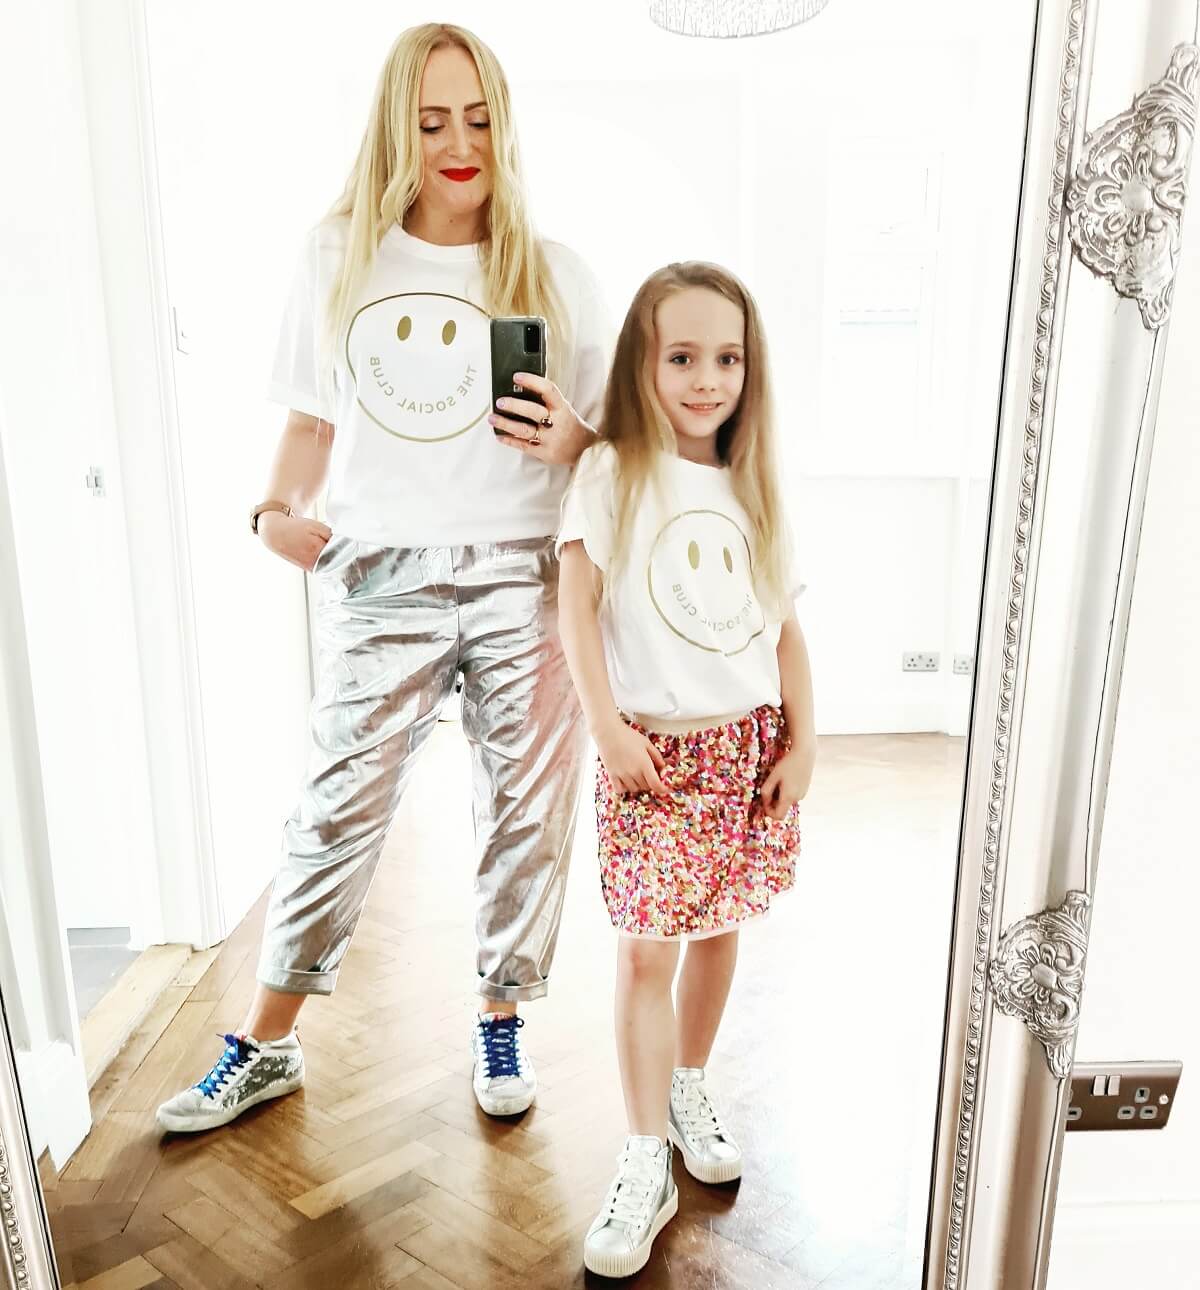 Jo and her daughter model The Social Club t-shirts